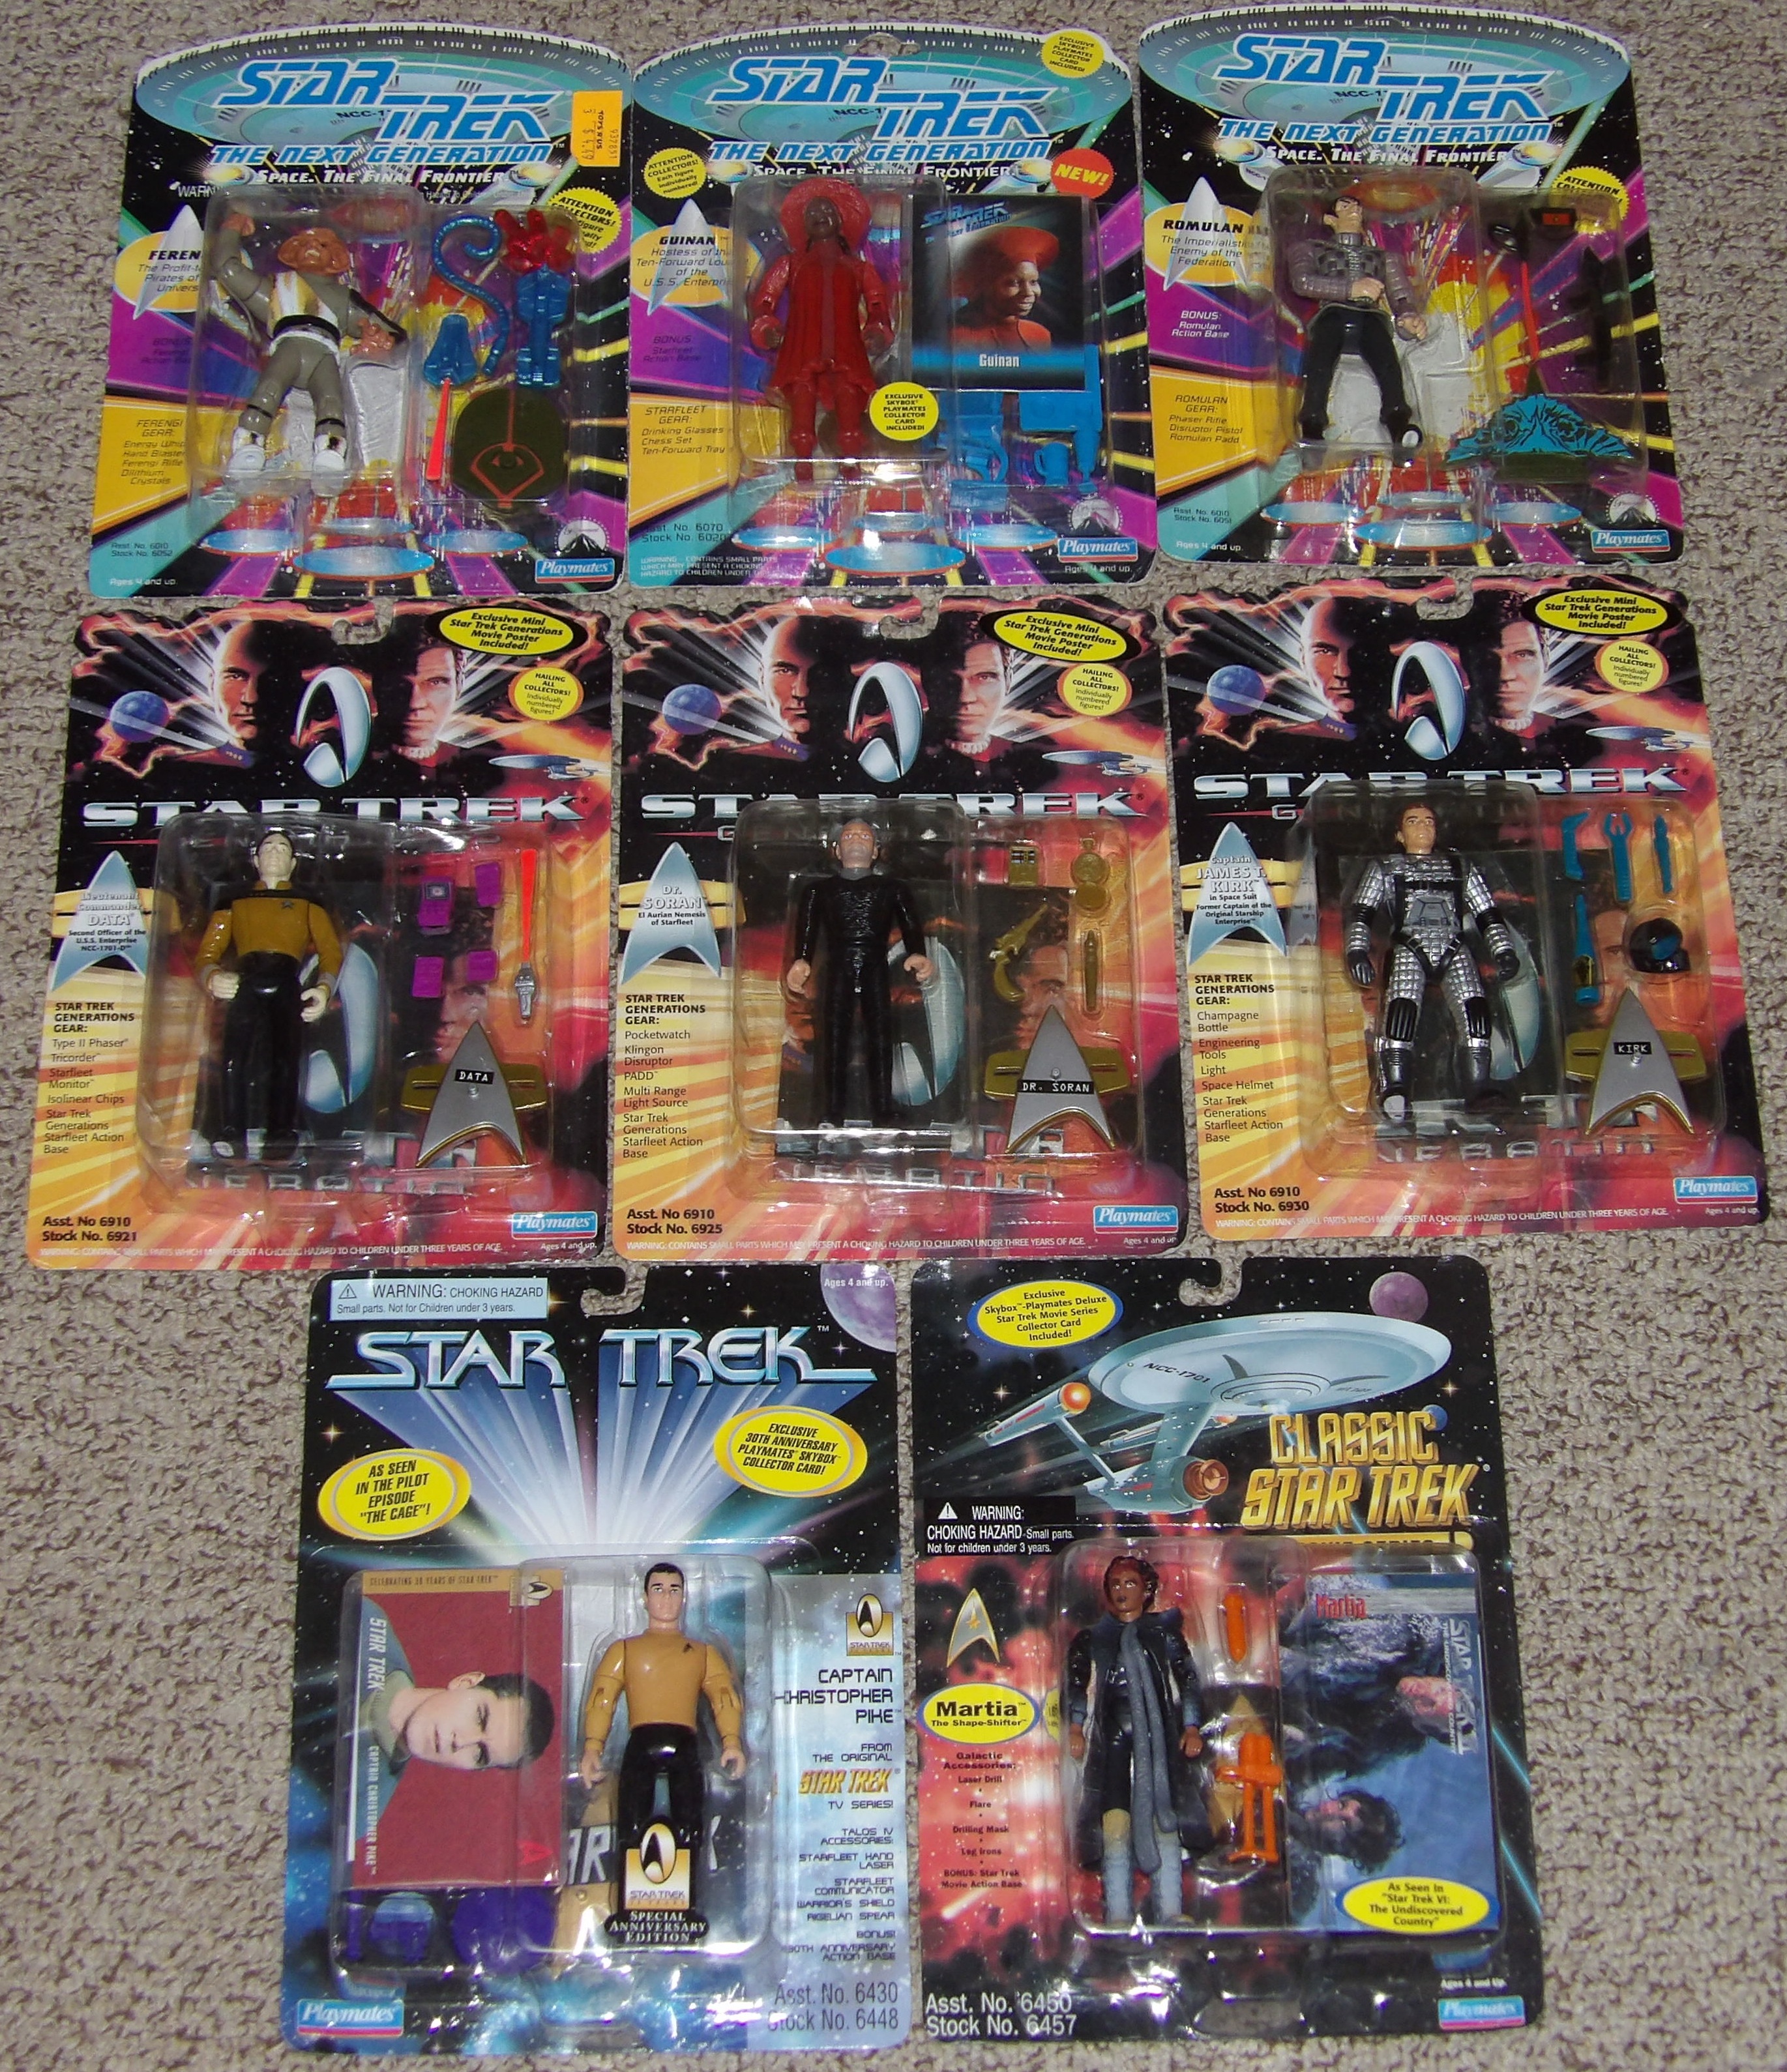 8 Star Trek action figures for trade or $ - Post 30739 0 76290900 1502063032